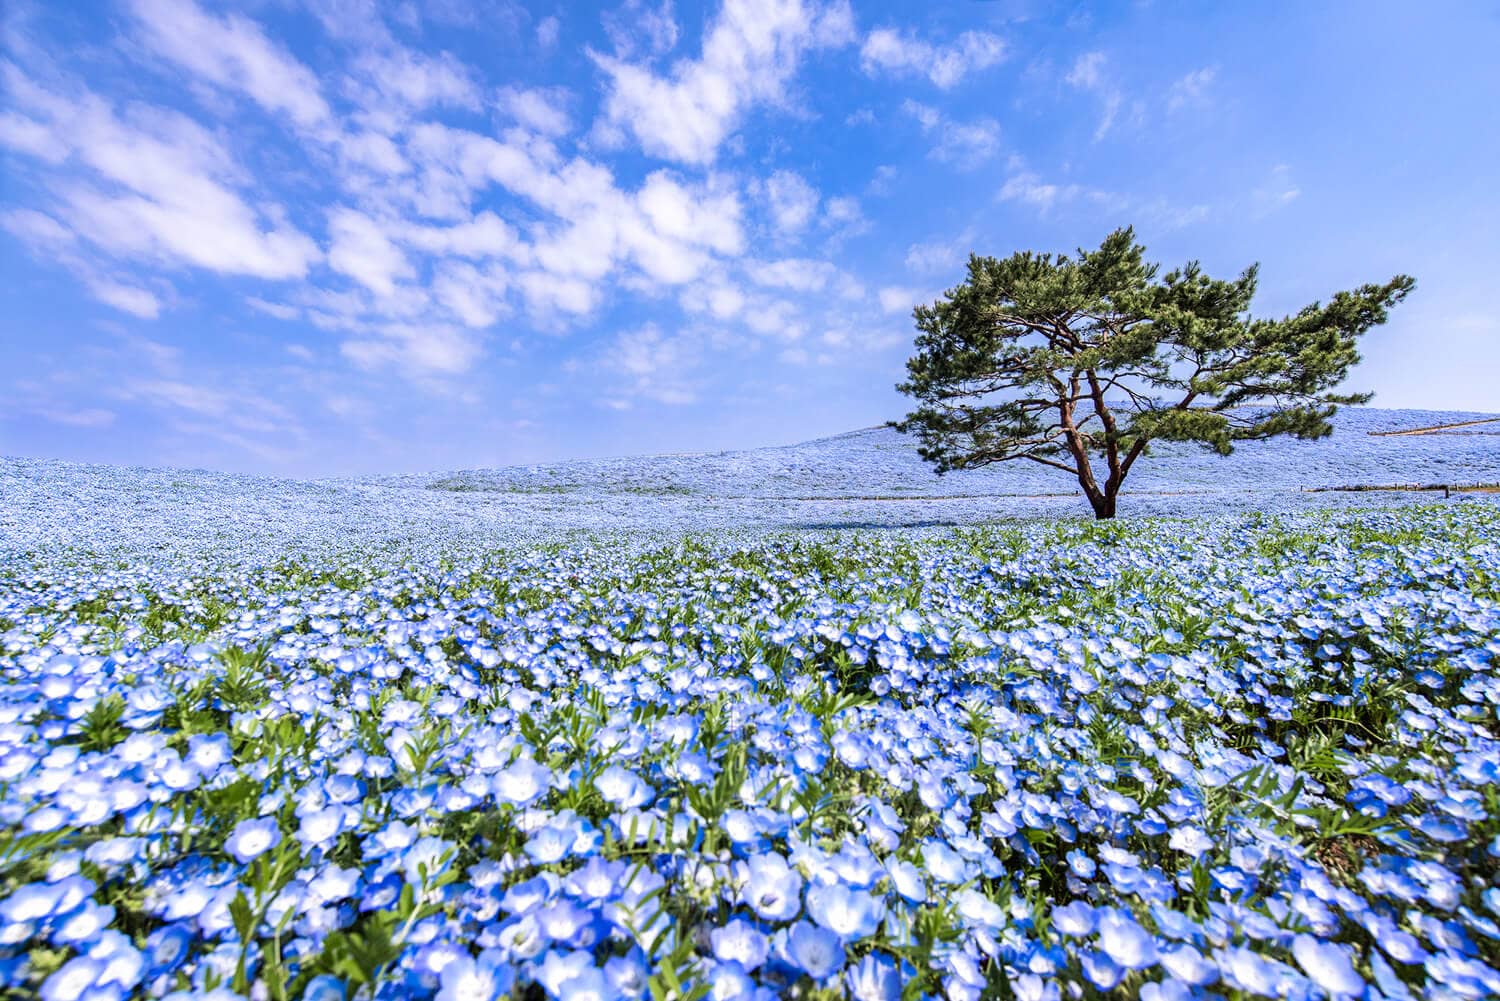 Field of blue flowers rolling over the hills as for as the eye can see